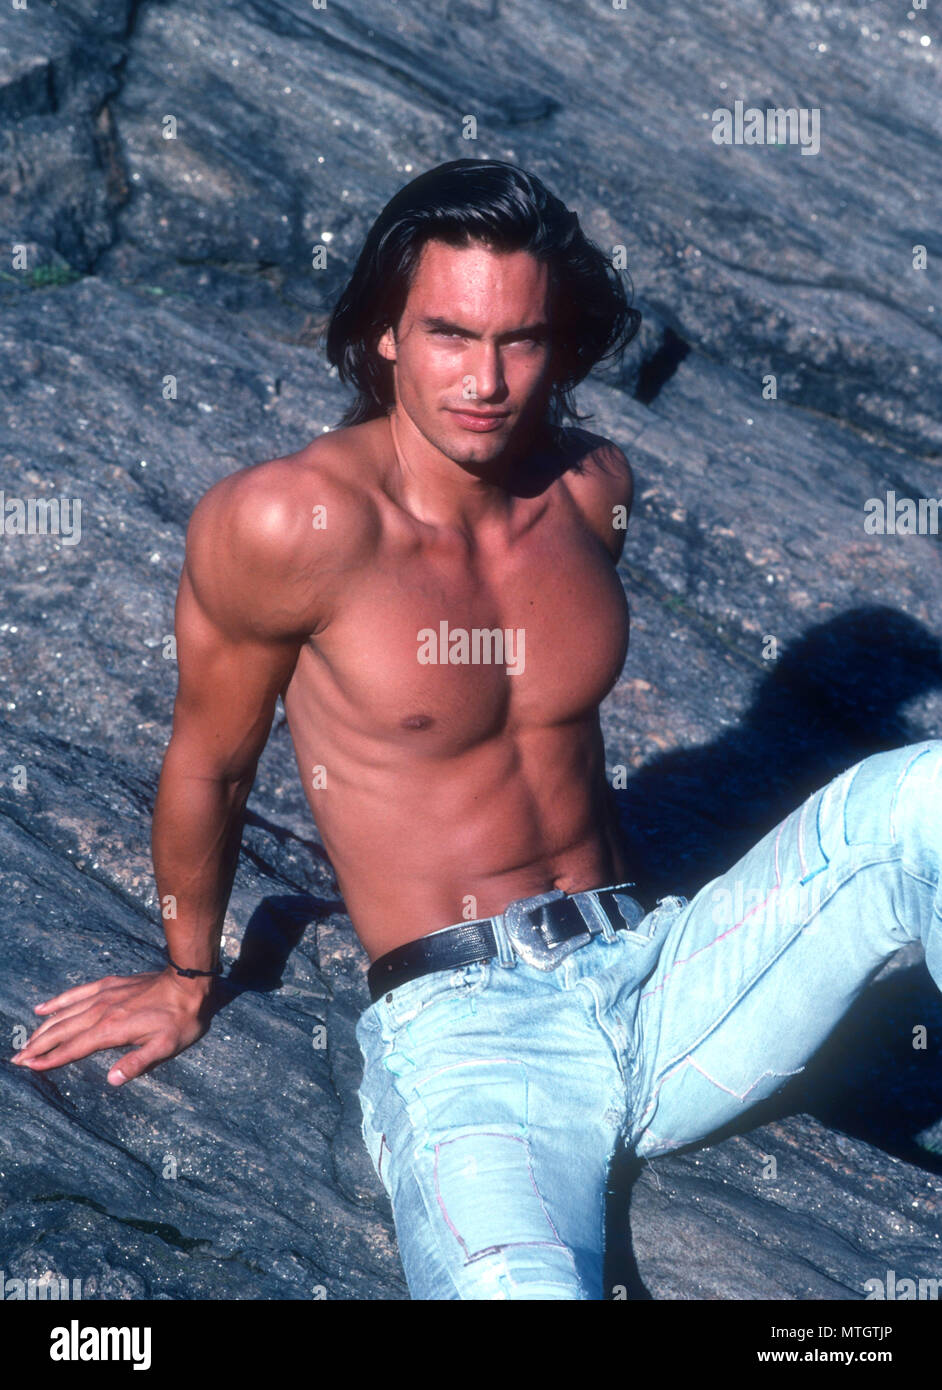 NEW YORK, NY - JUNE 14: (EXCLUSIVE) Model Marcus Schenkenberg poses during  a photo shoot on June 14, 1991 in New York City, New York. Photo by Barry  King/Alamy Stock Photo Stock Photo - Alamy